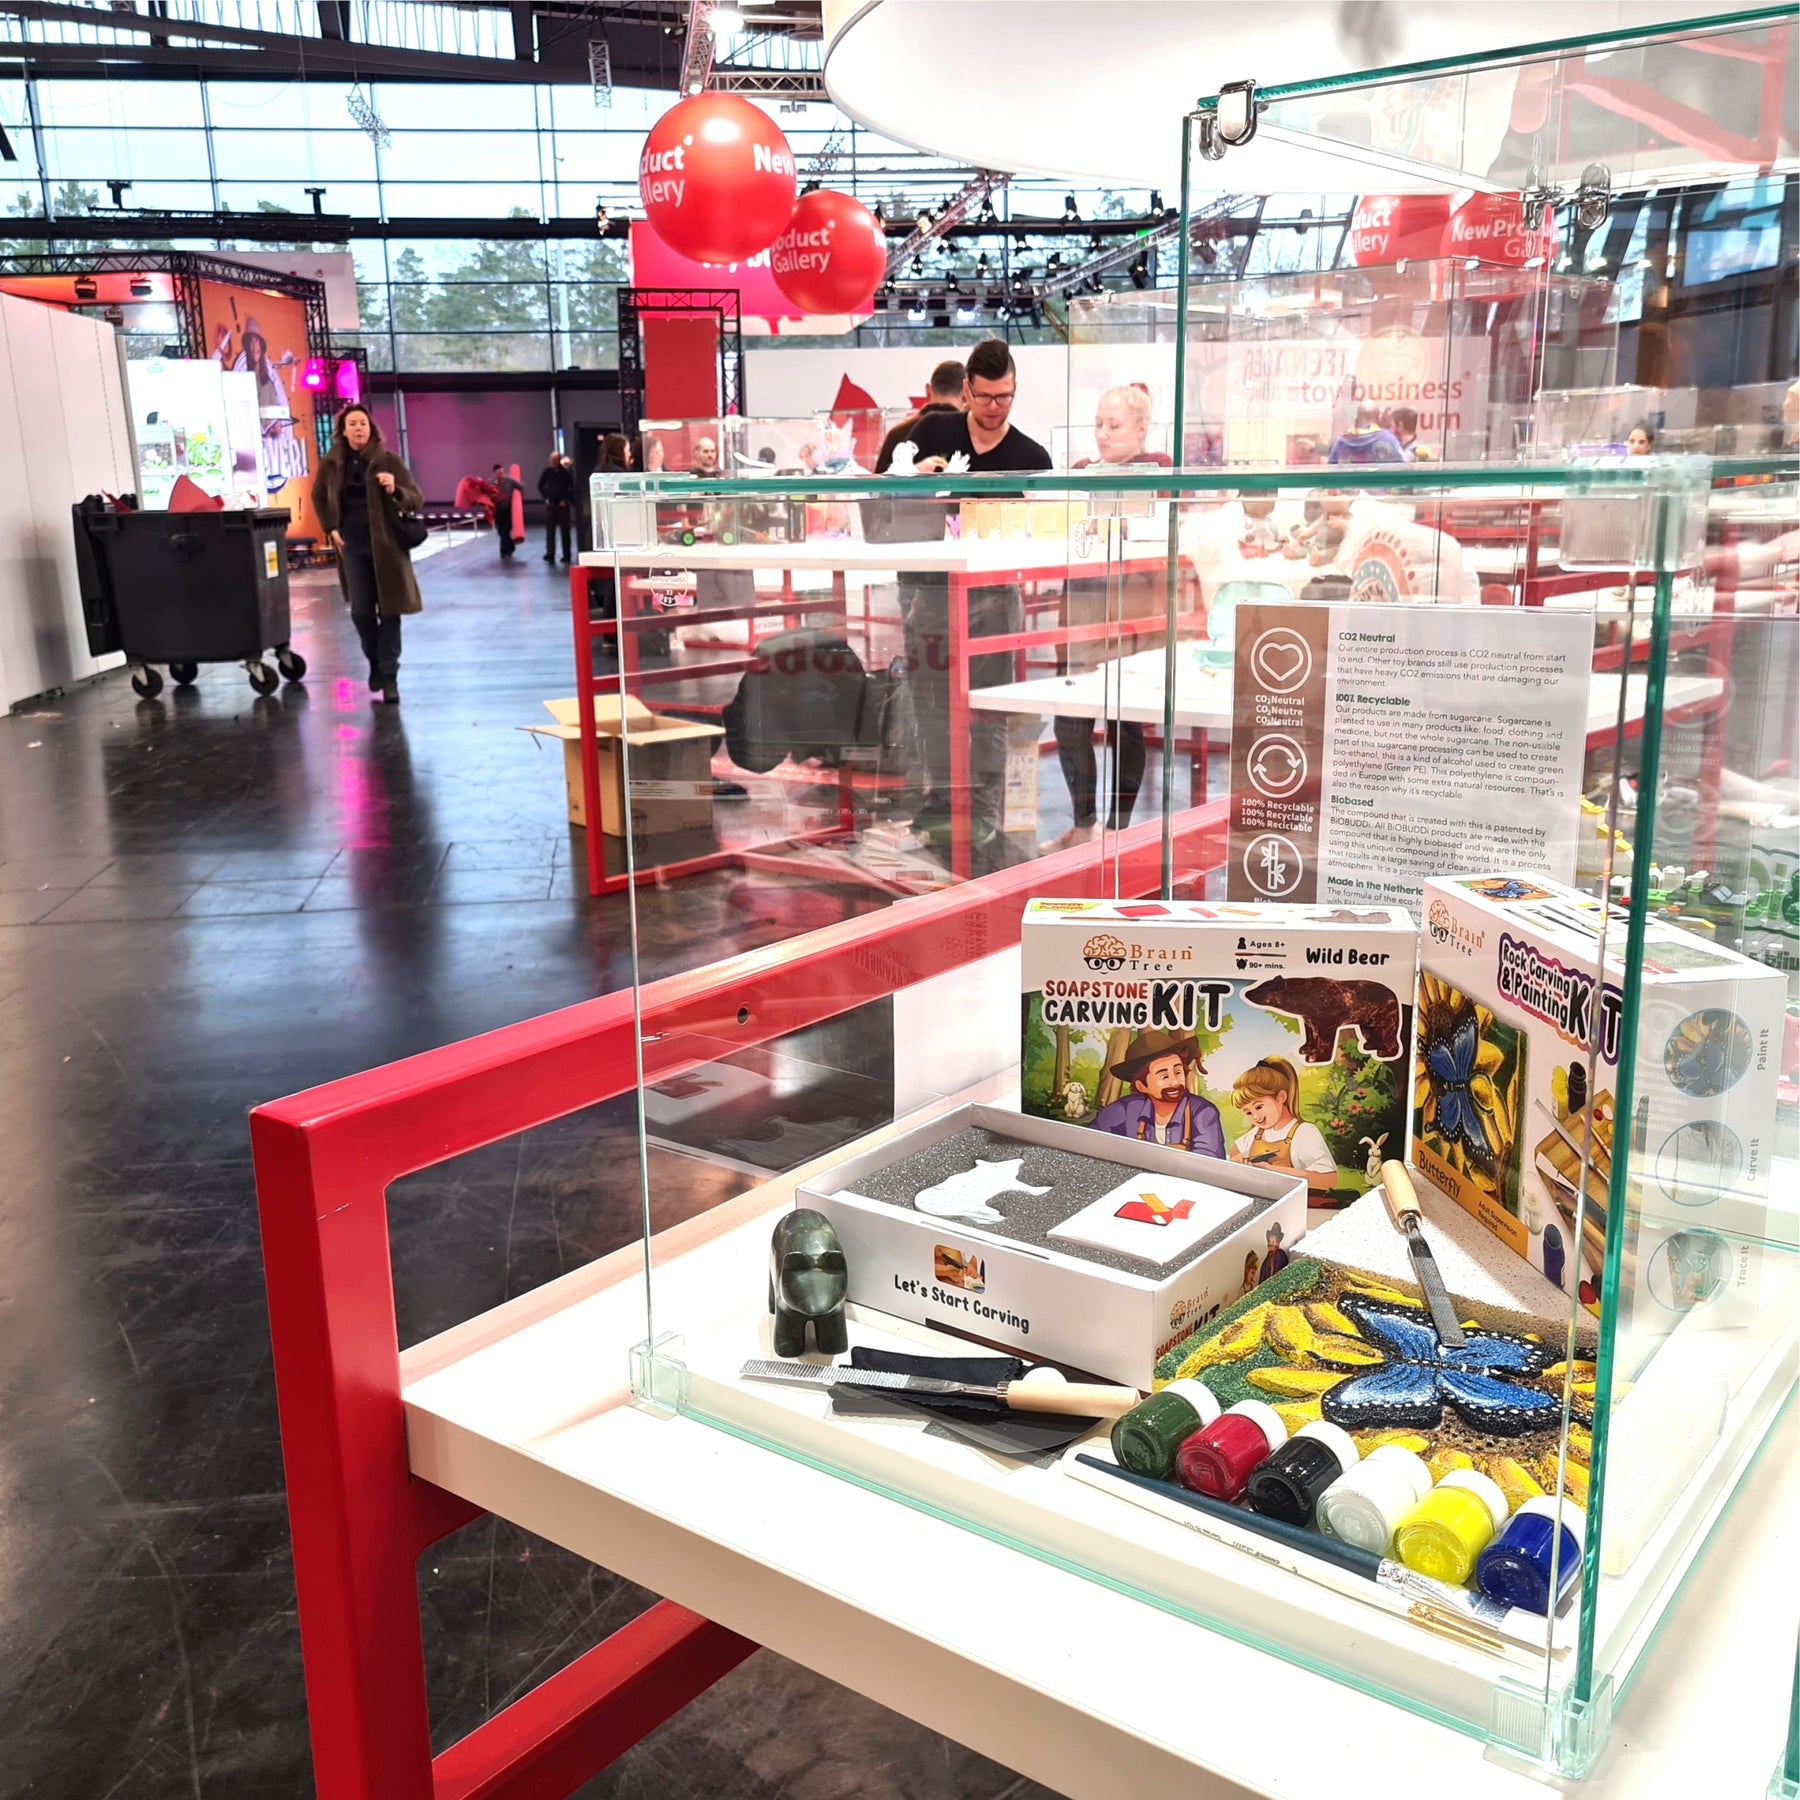 Our Experience at the Nürnberger Spielwarenmesse: Showcasing the Latest in DIY Kits and Jigsaw Puzzles